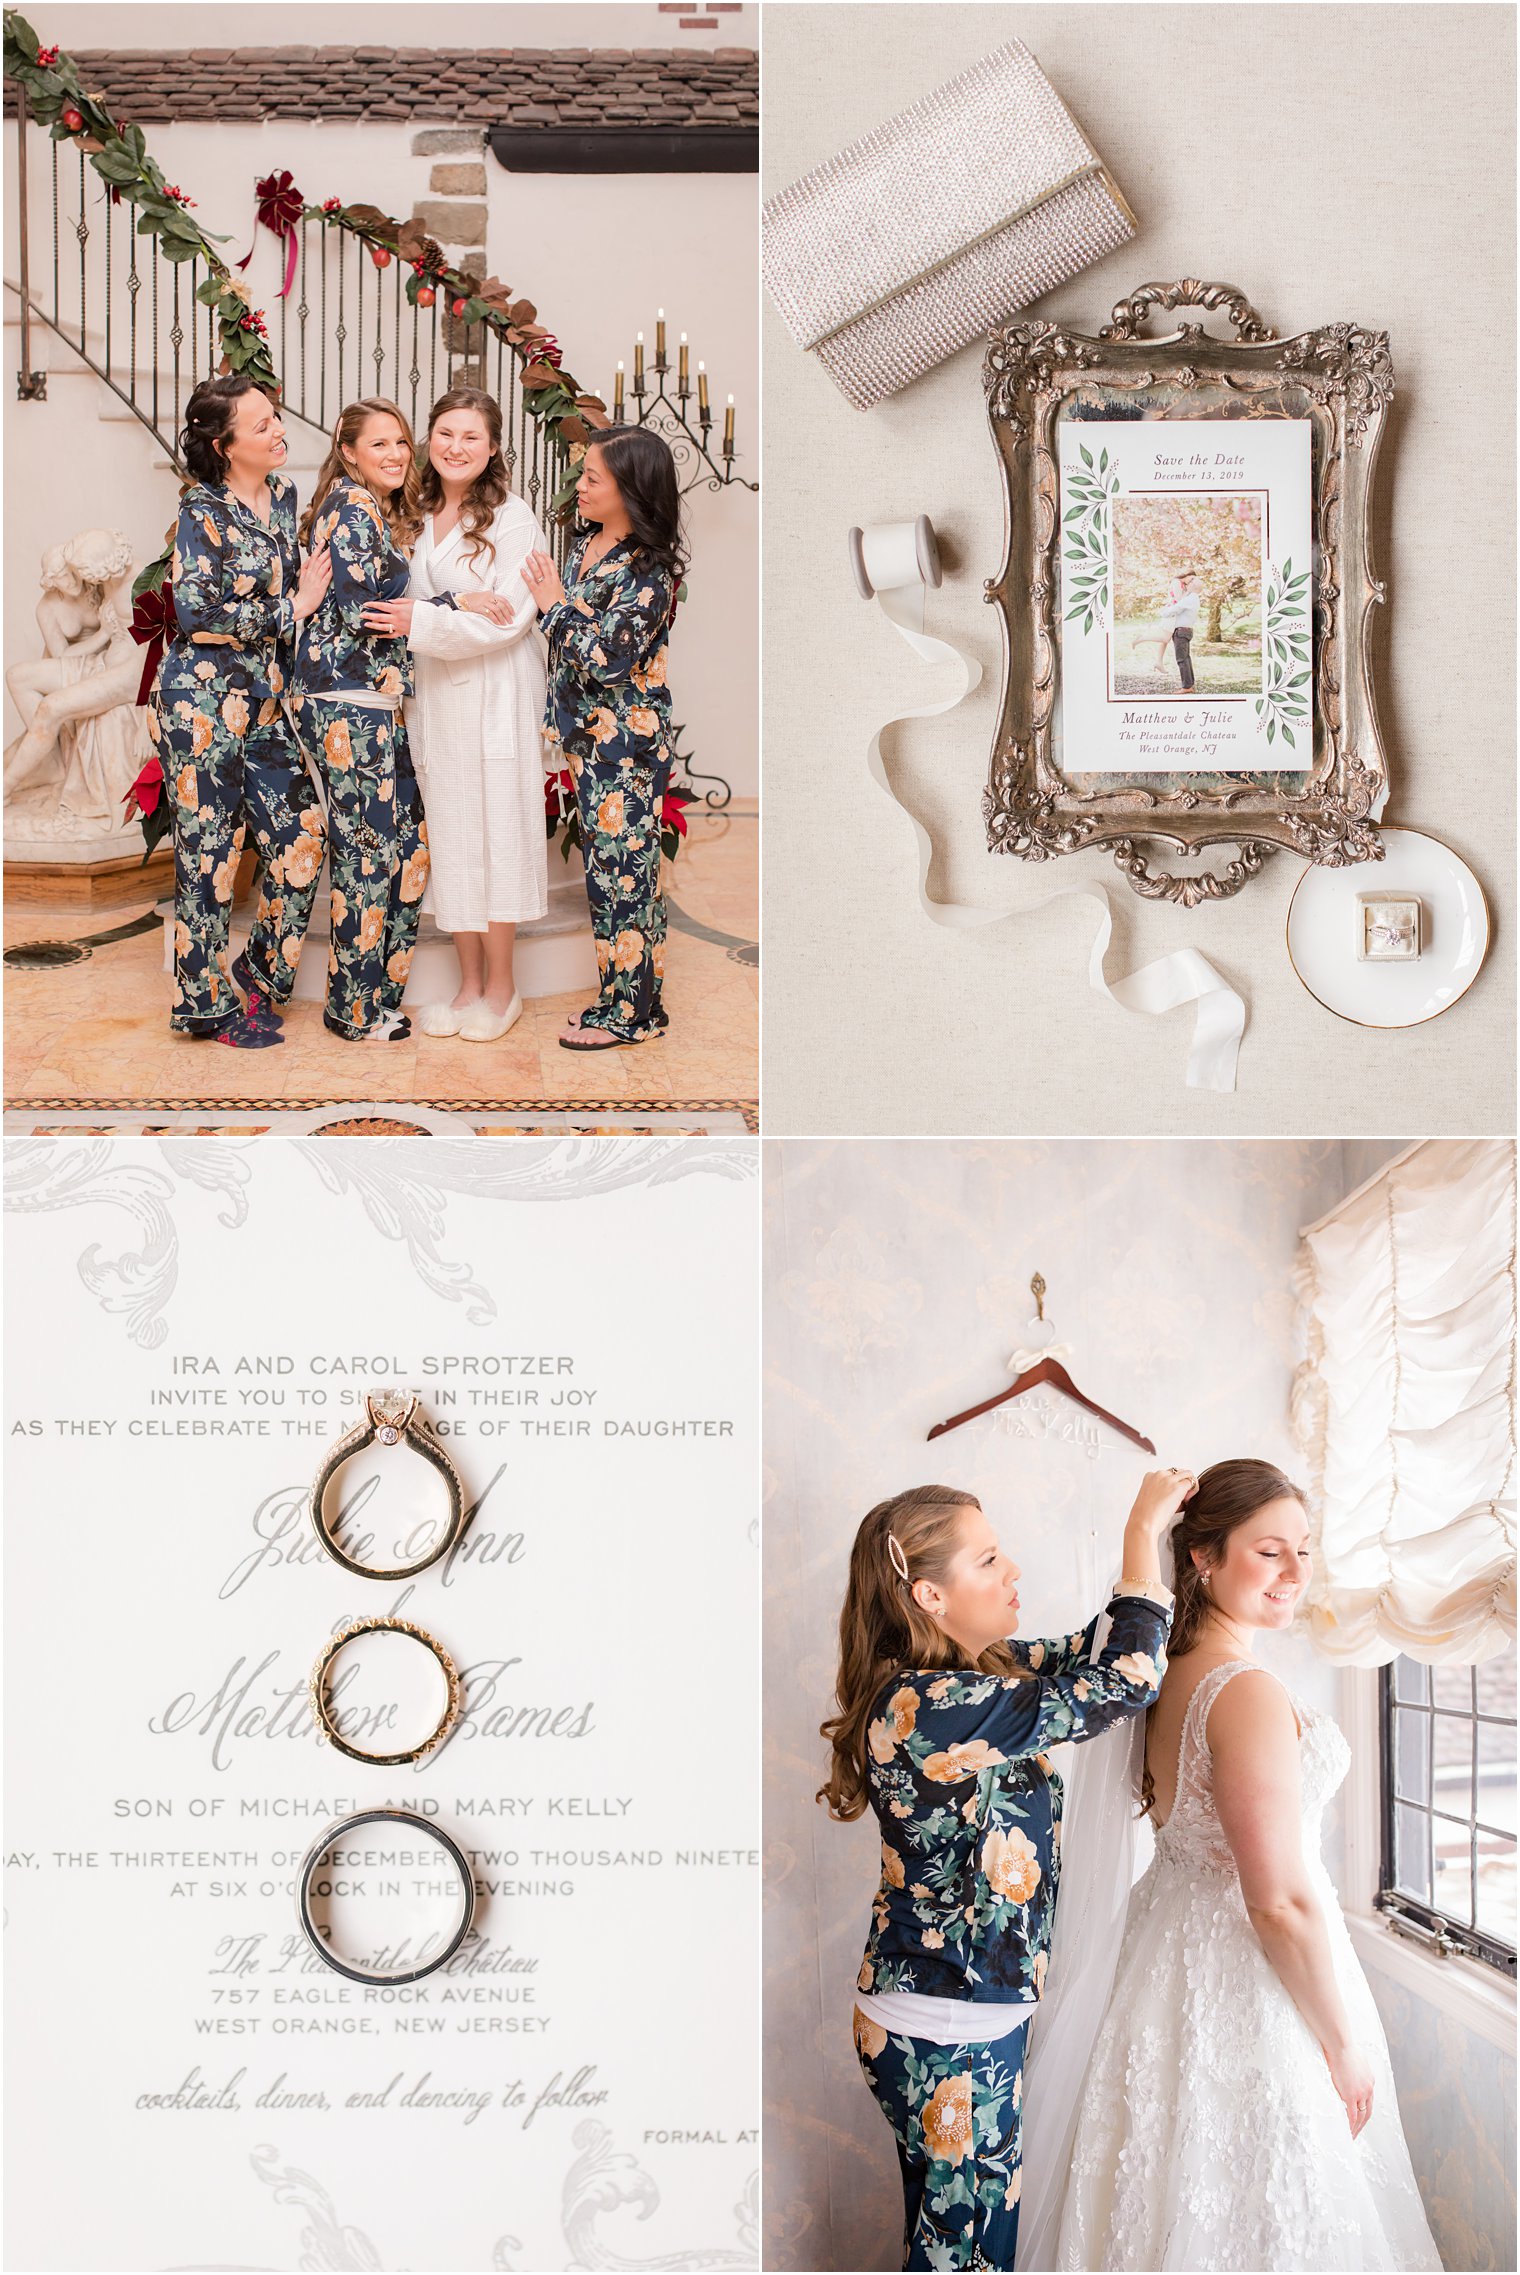 Bride's wedding party and bridal details